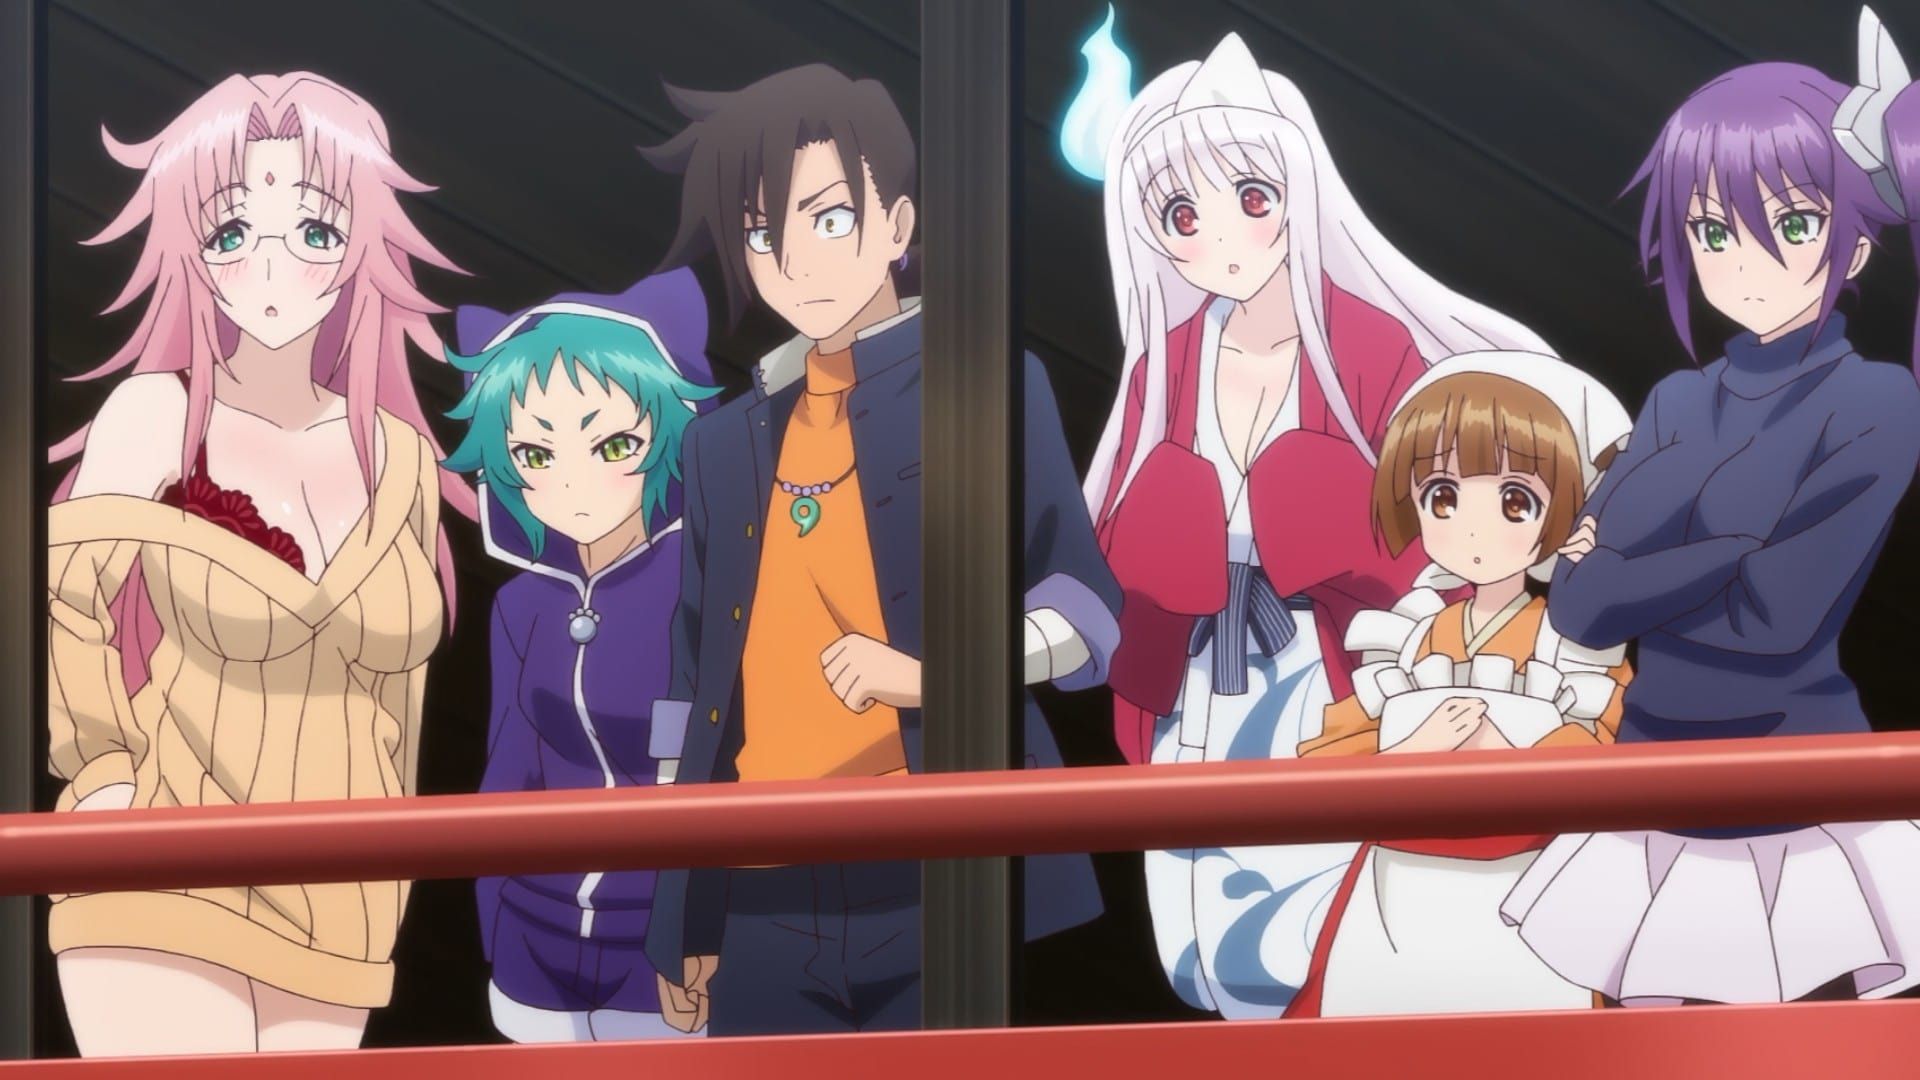 Watch Yuuna and the Haunted Hot Springs season 1 episode 5 streaming online